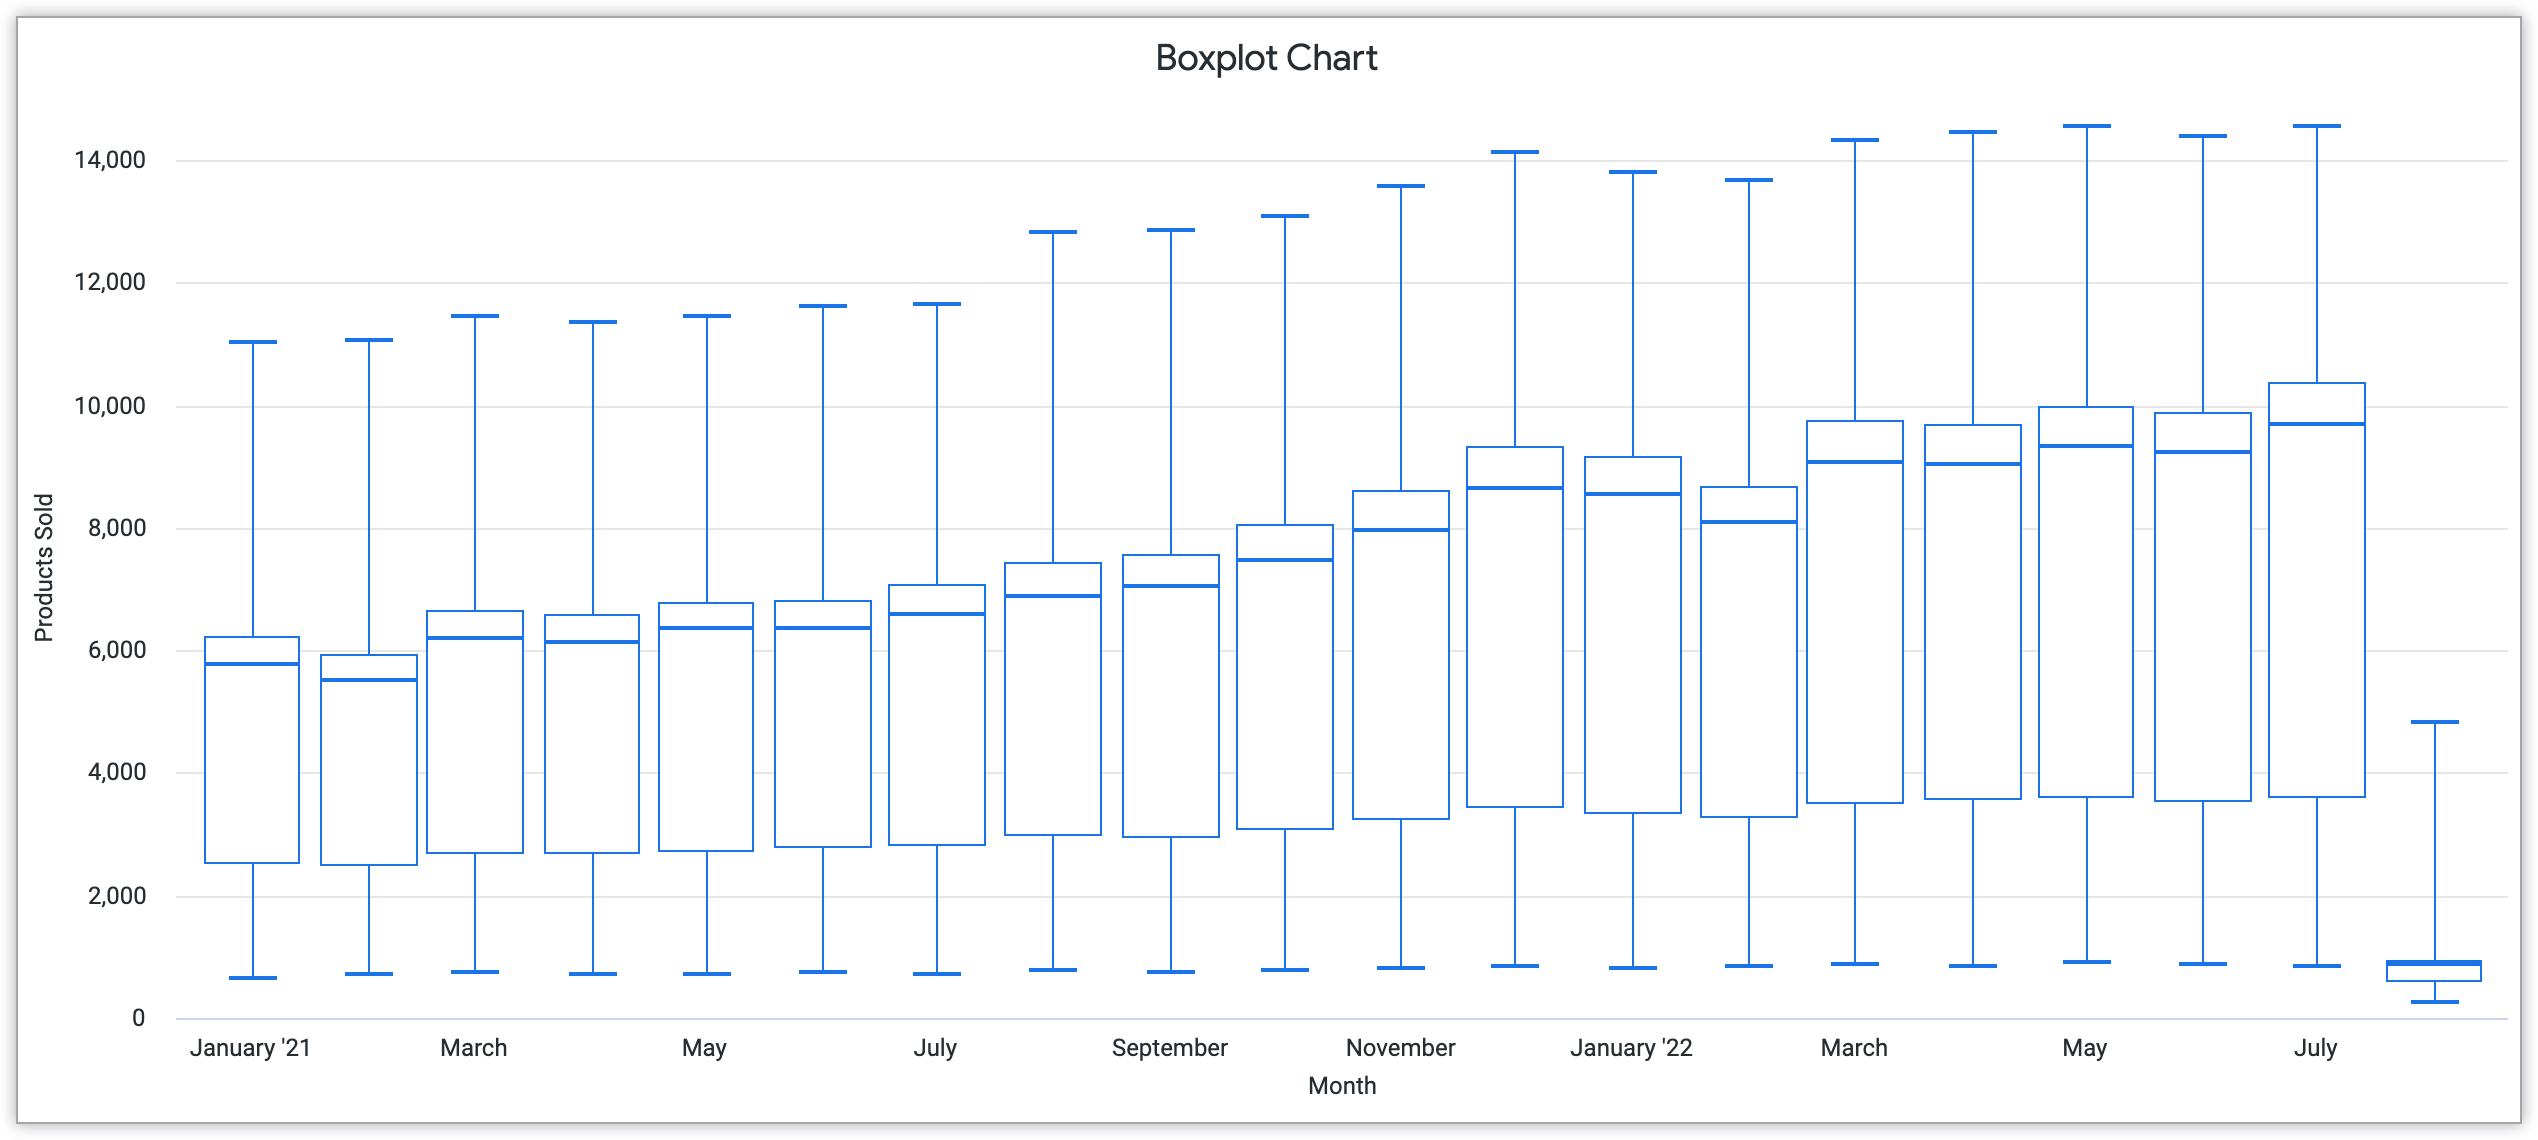 Boxplot chart showing Month on the x-axis and Products Sold on the y-axis.